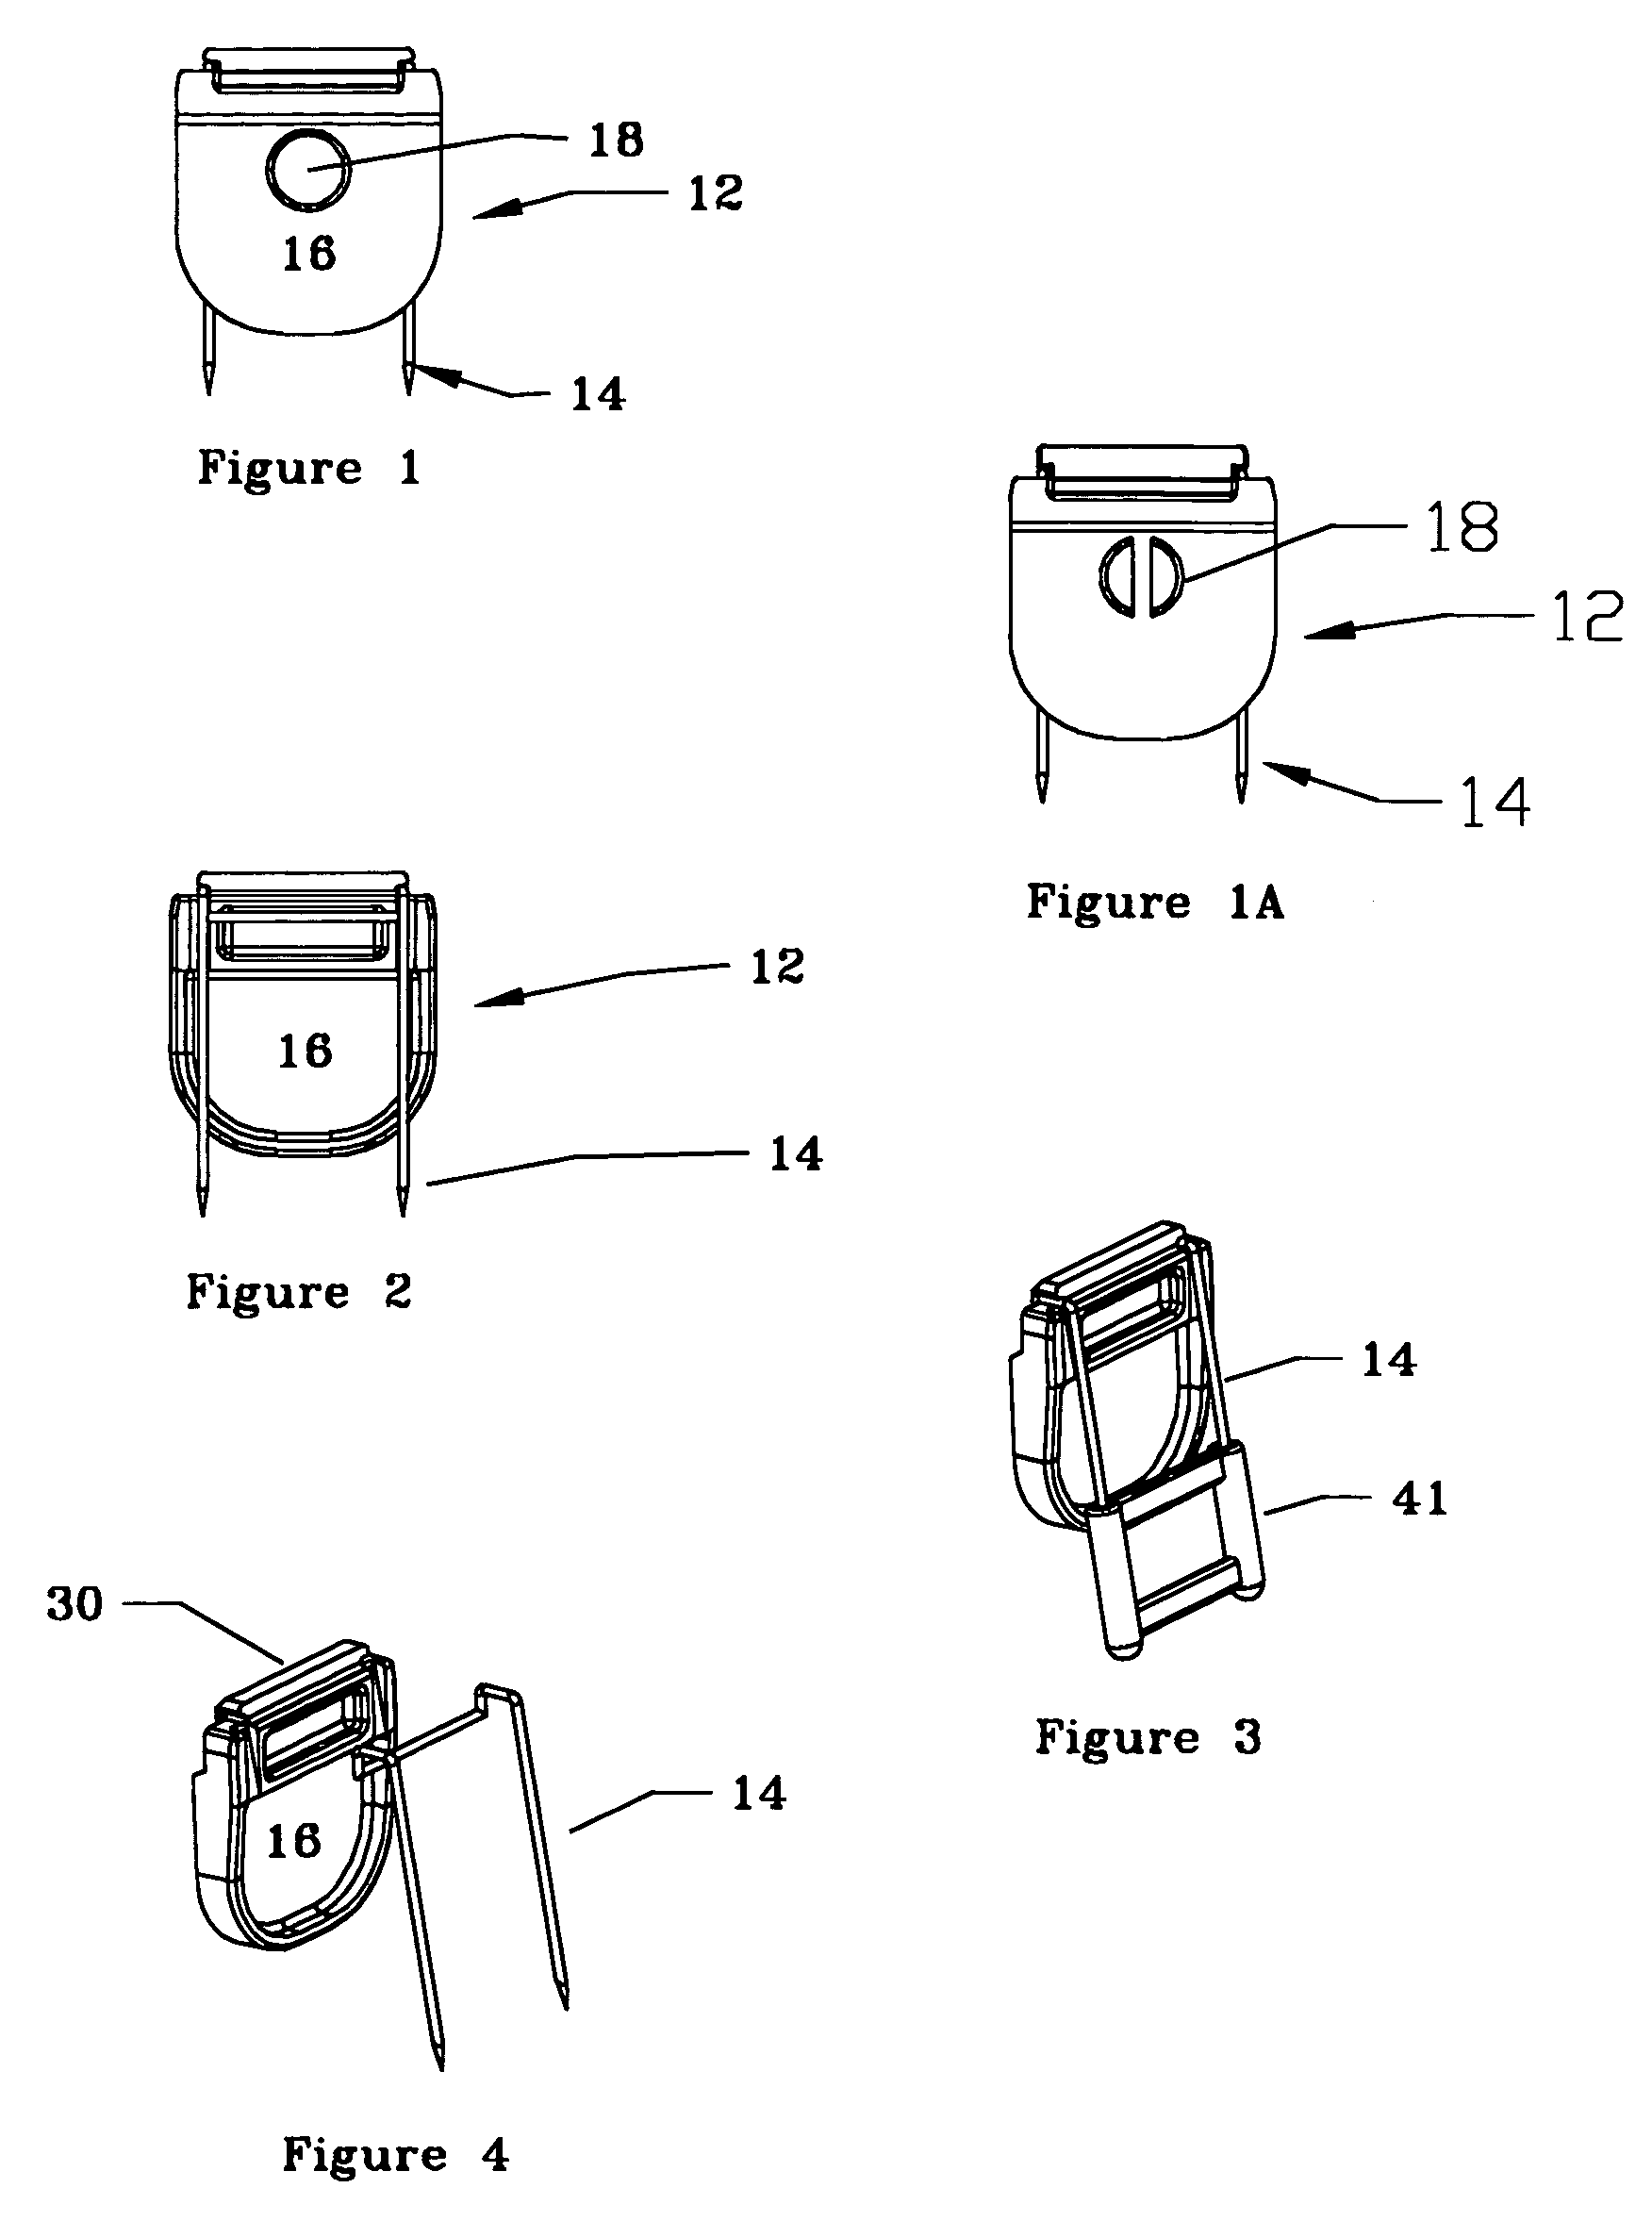 Attachment device for panel walls